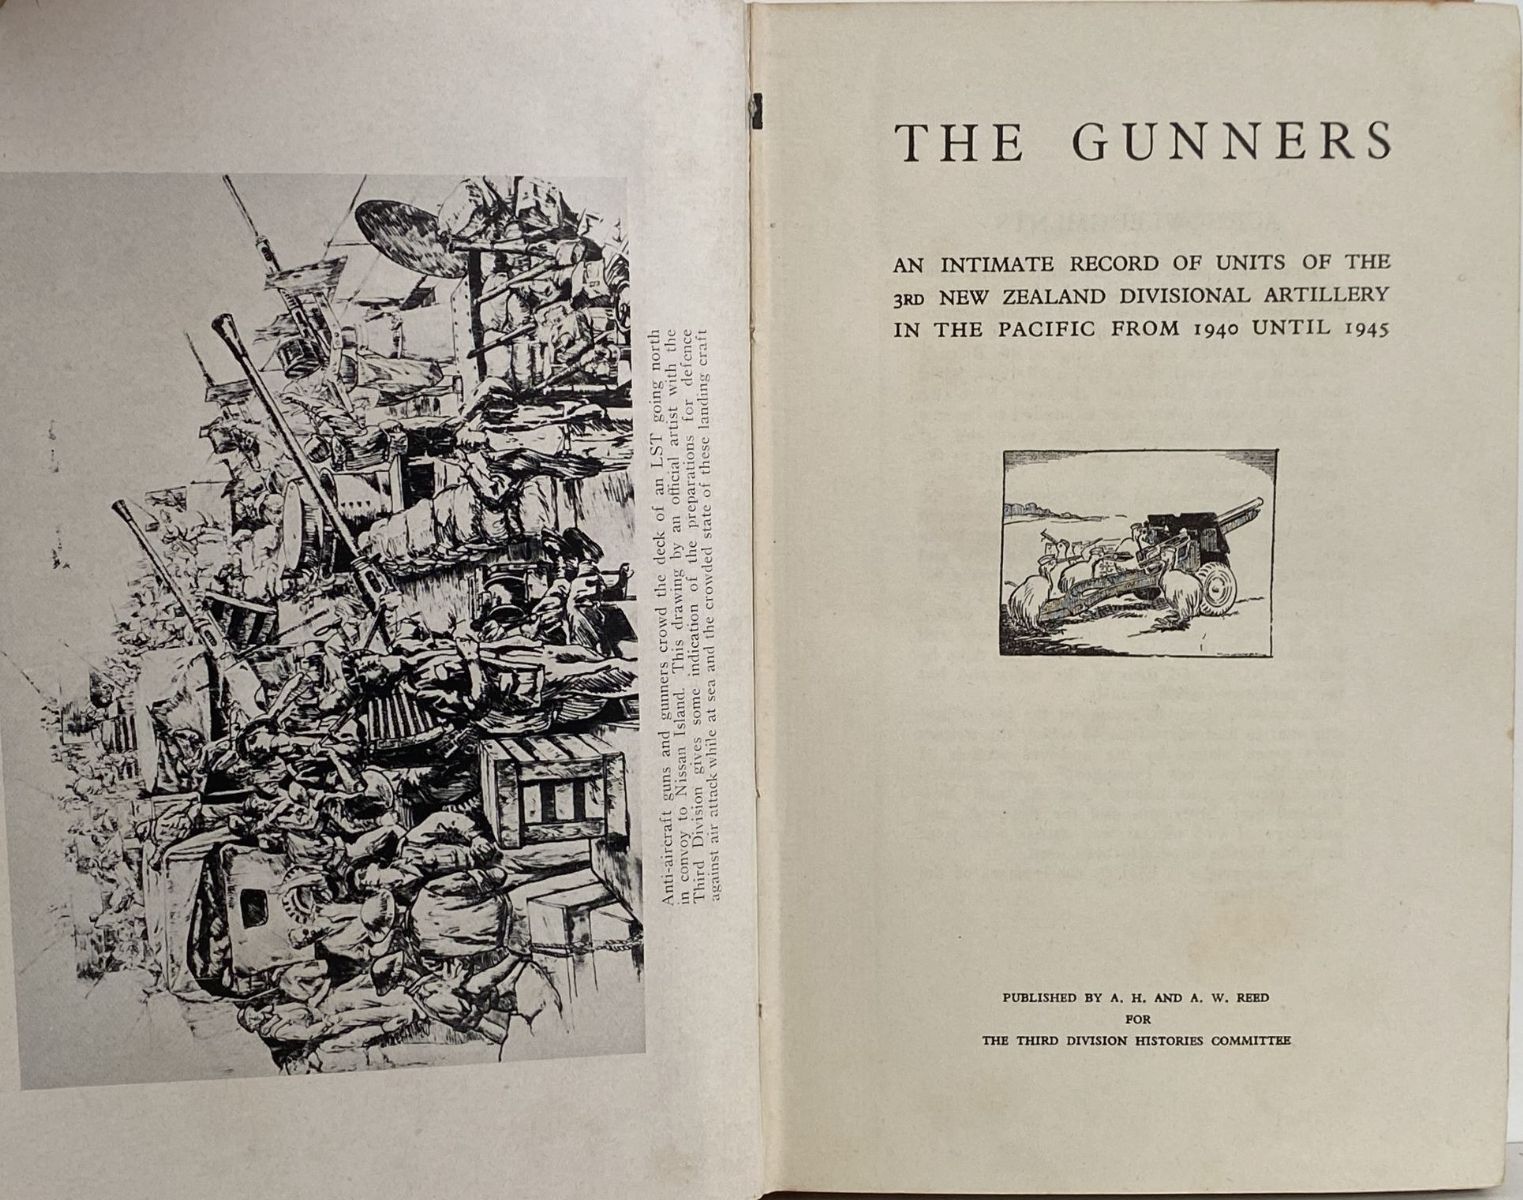 THE GUNNERS: Intimate Record of 3rd Divisional Artillery in the Pacific